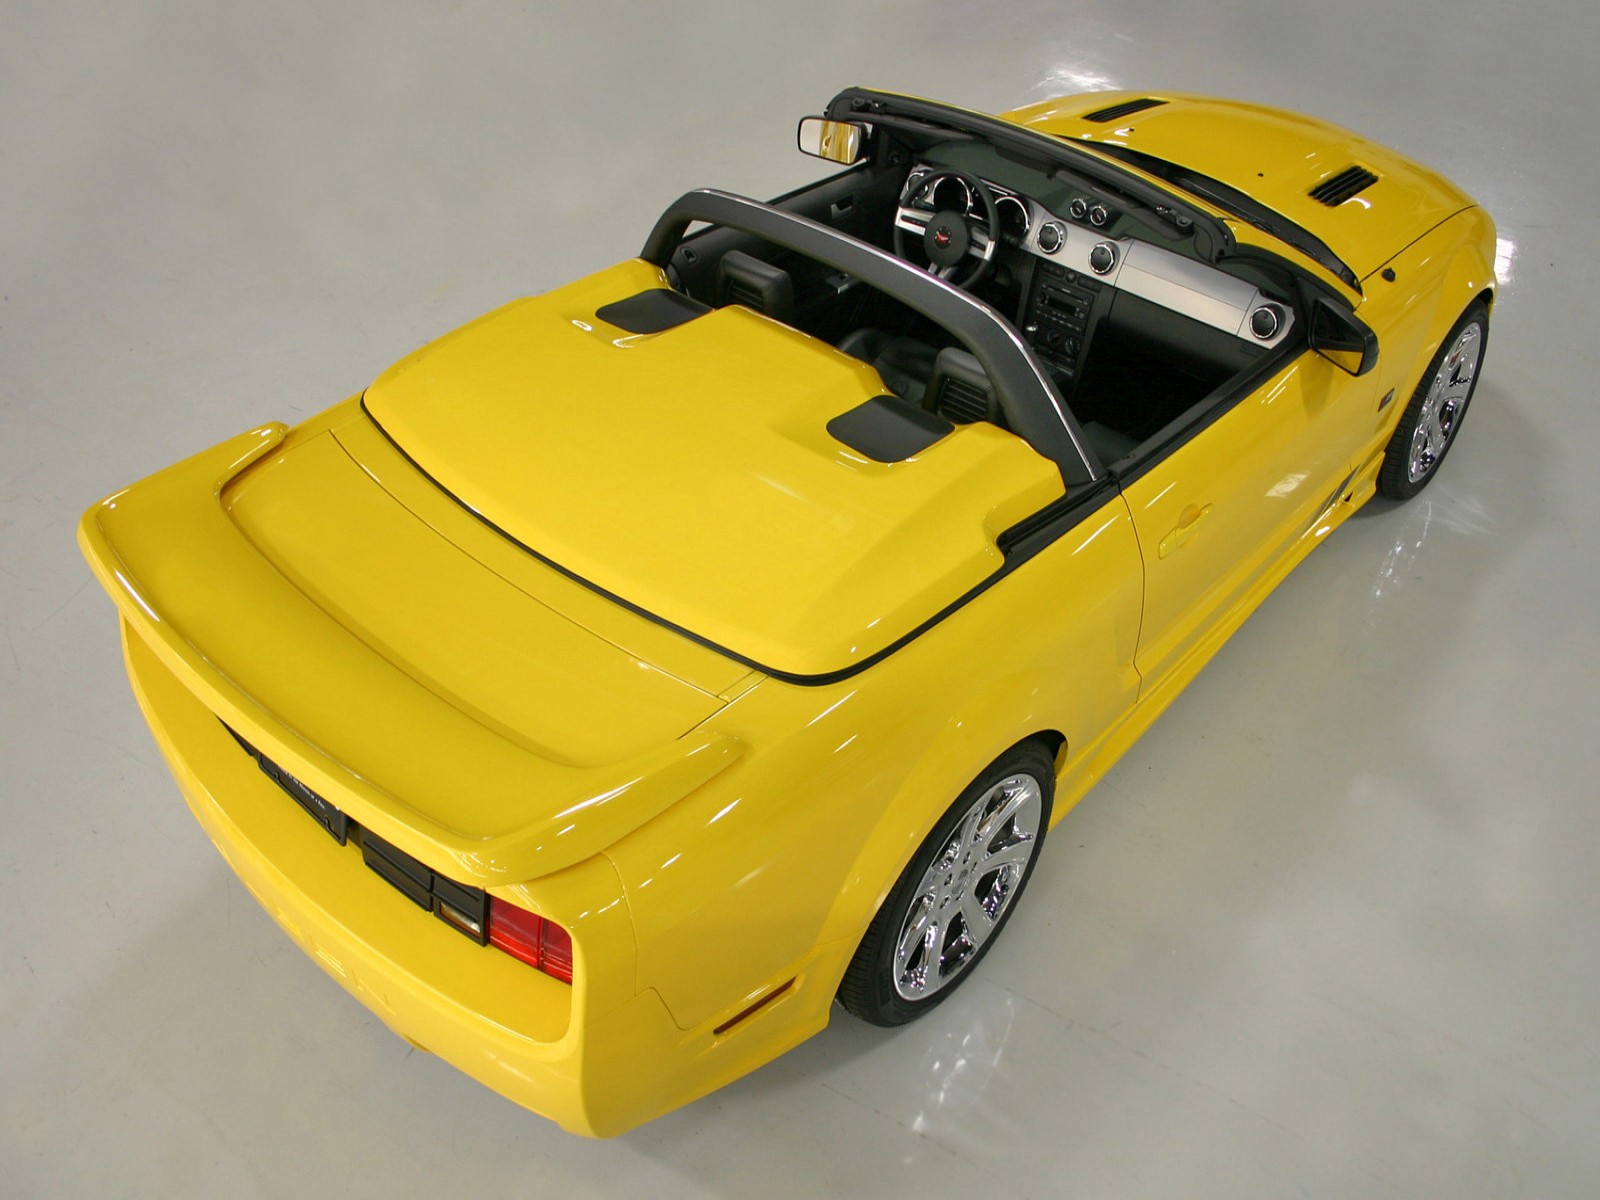 Car Pictures: Saleen Ford Mustang S281 Speedster 2006